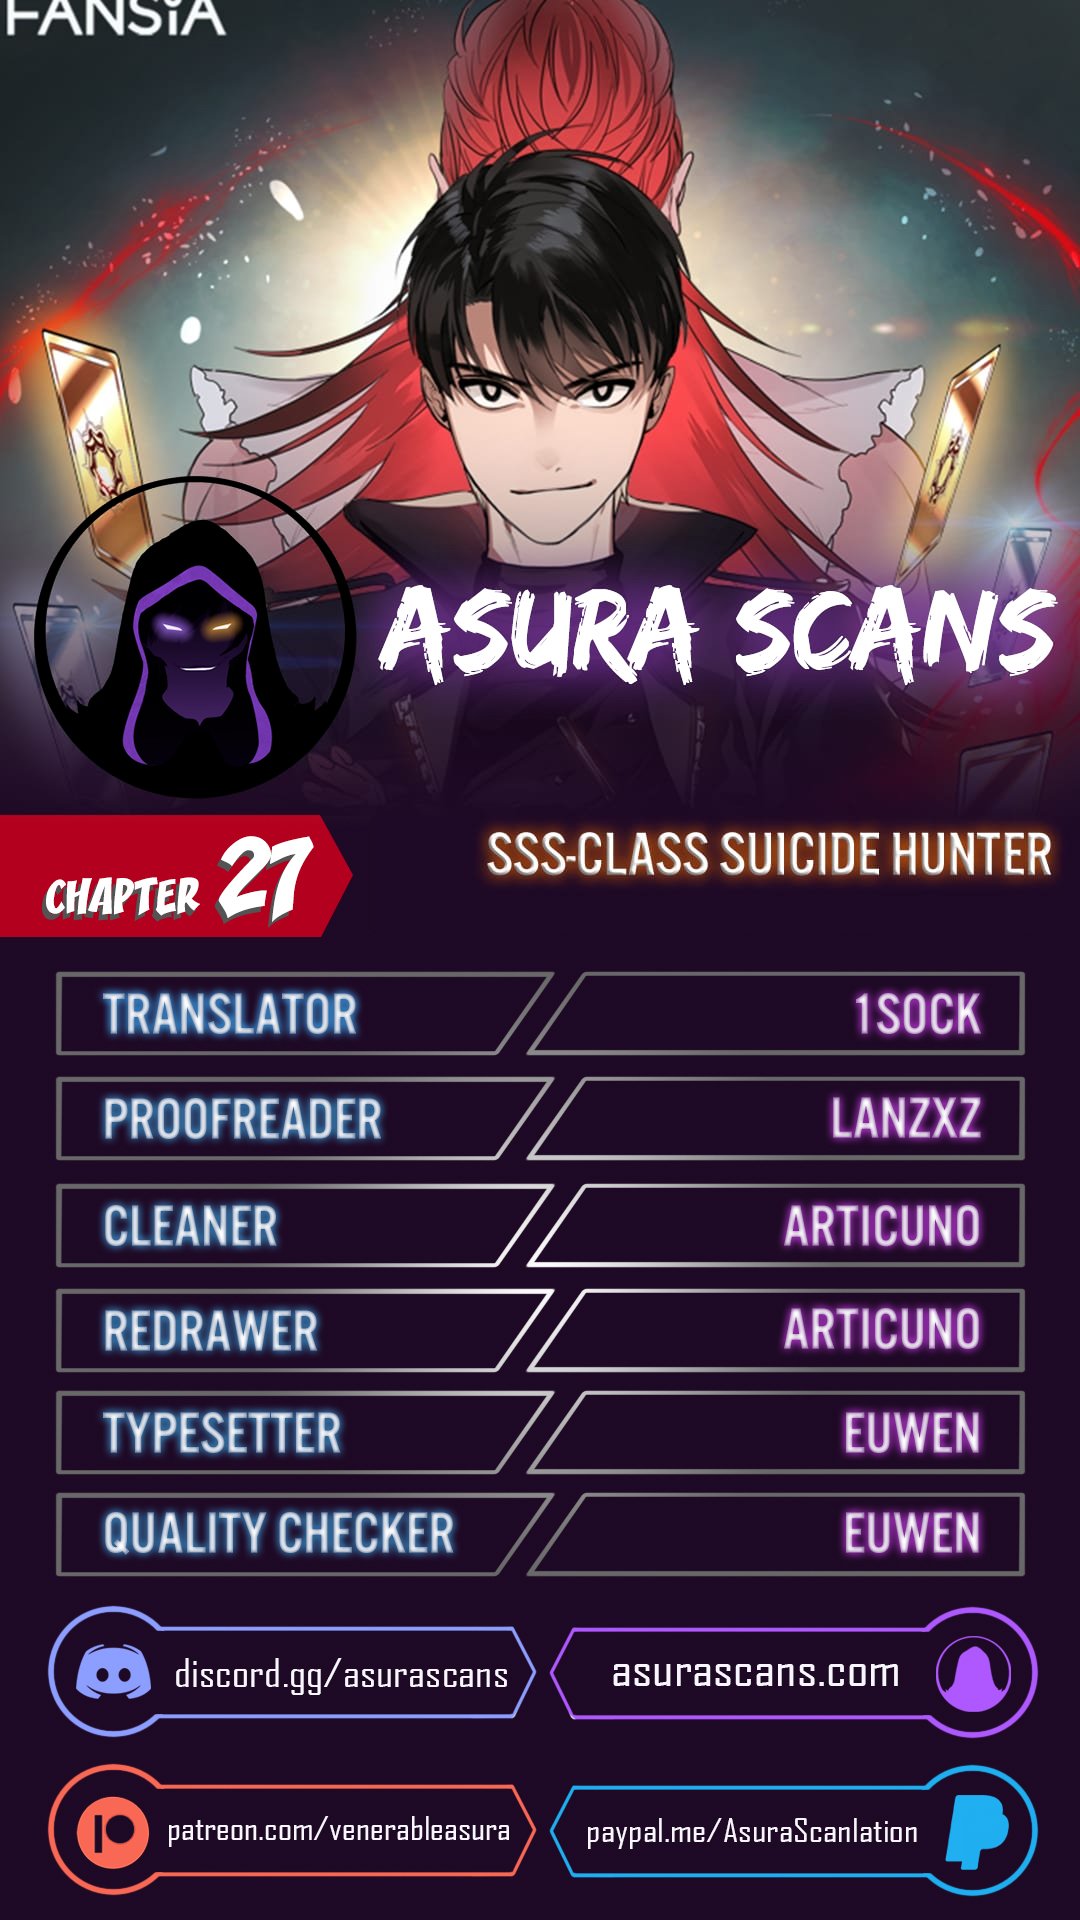 SSS-Class Suicide Hunter chapter 27